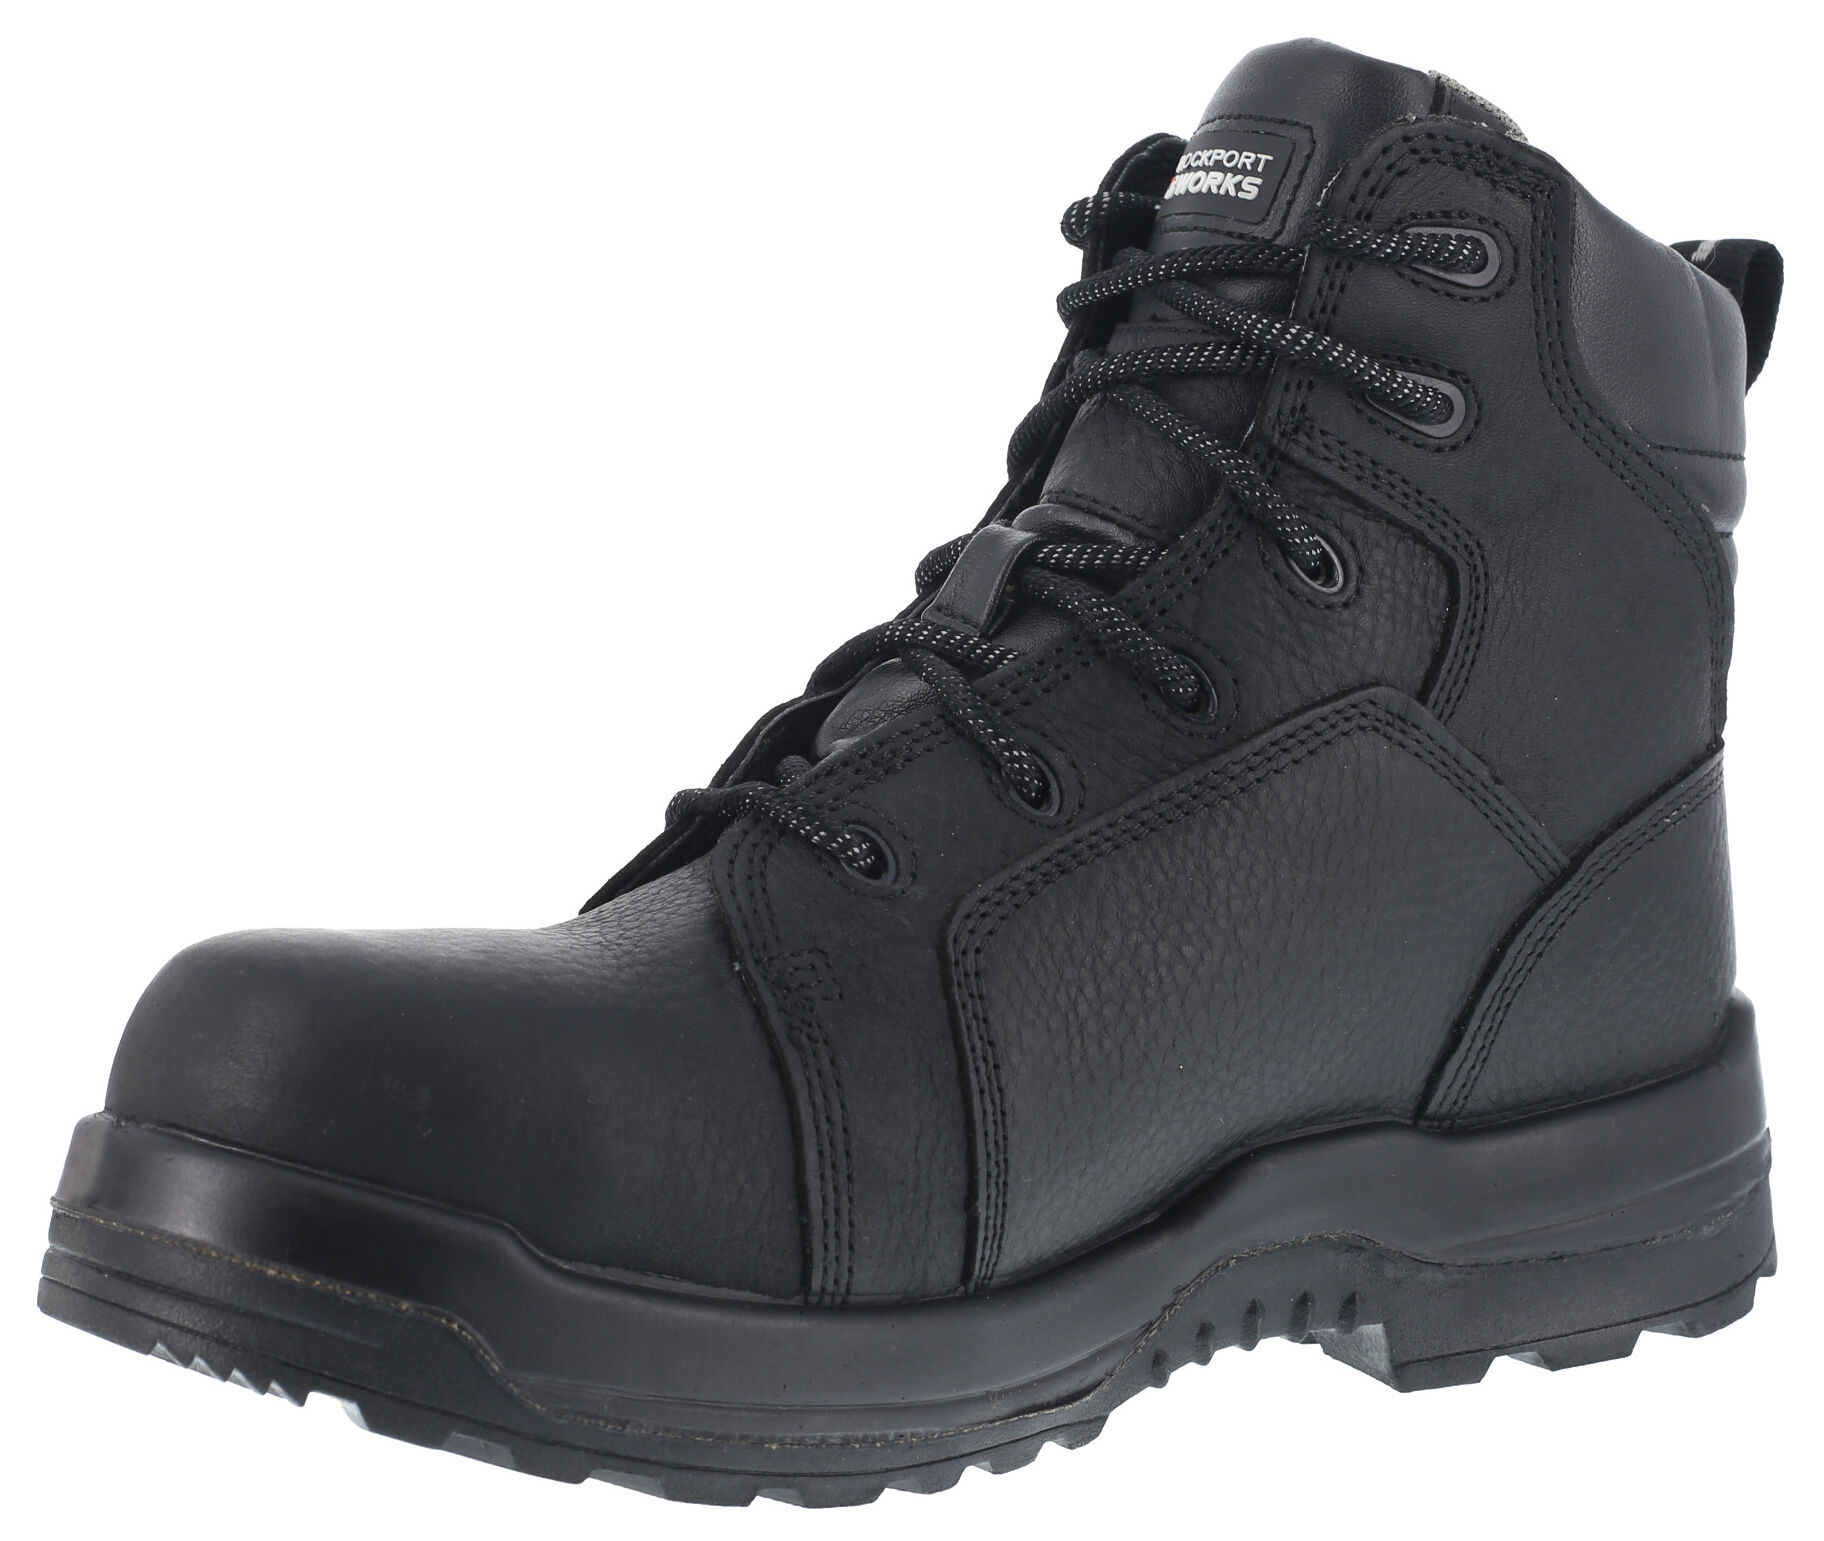 rockport work boots womens